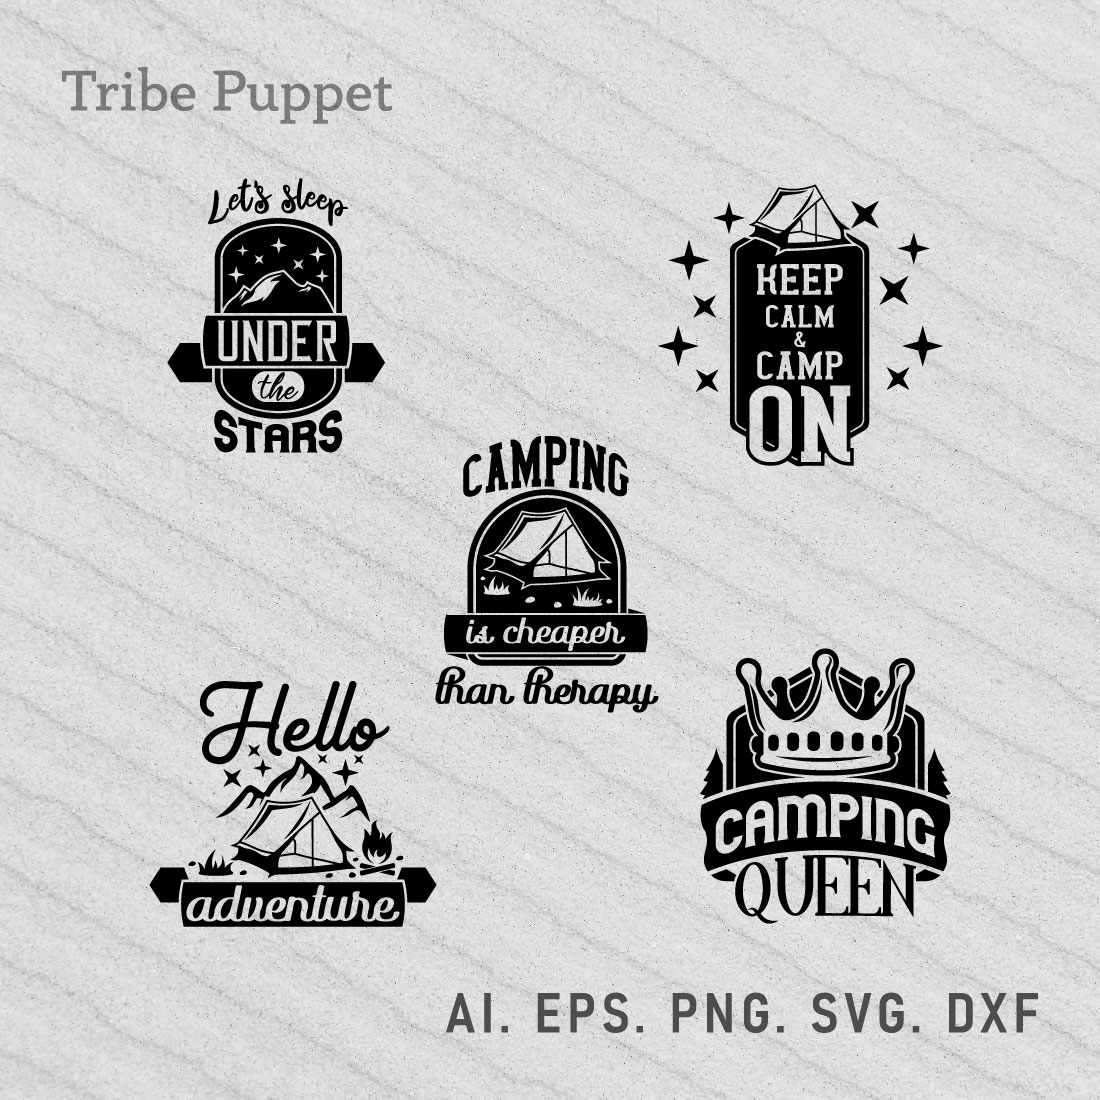 Set of logos for a camping company.